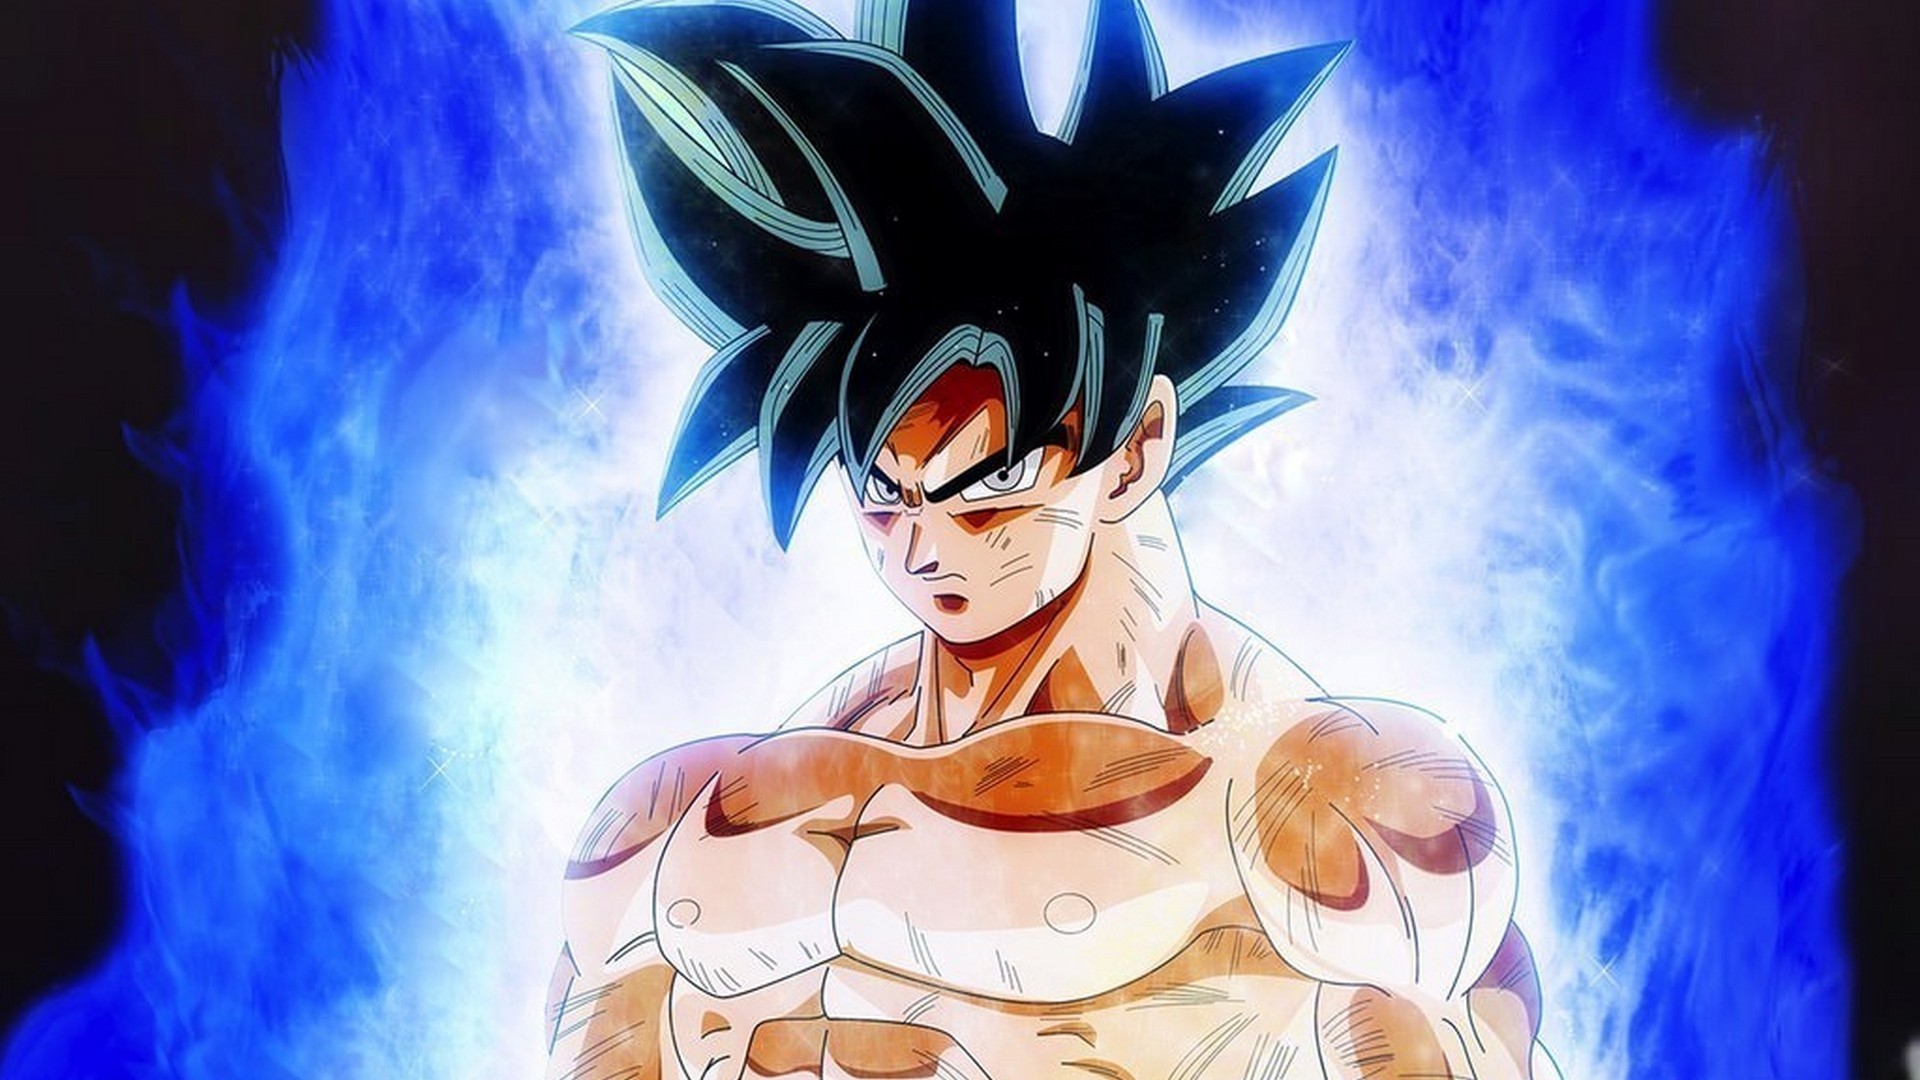 Best Goku Images Wallpaper With Image Resolution Pixel - Dragon Ball Super Wallpaper Animated - HD Wallpaper 